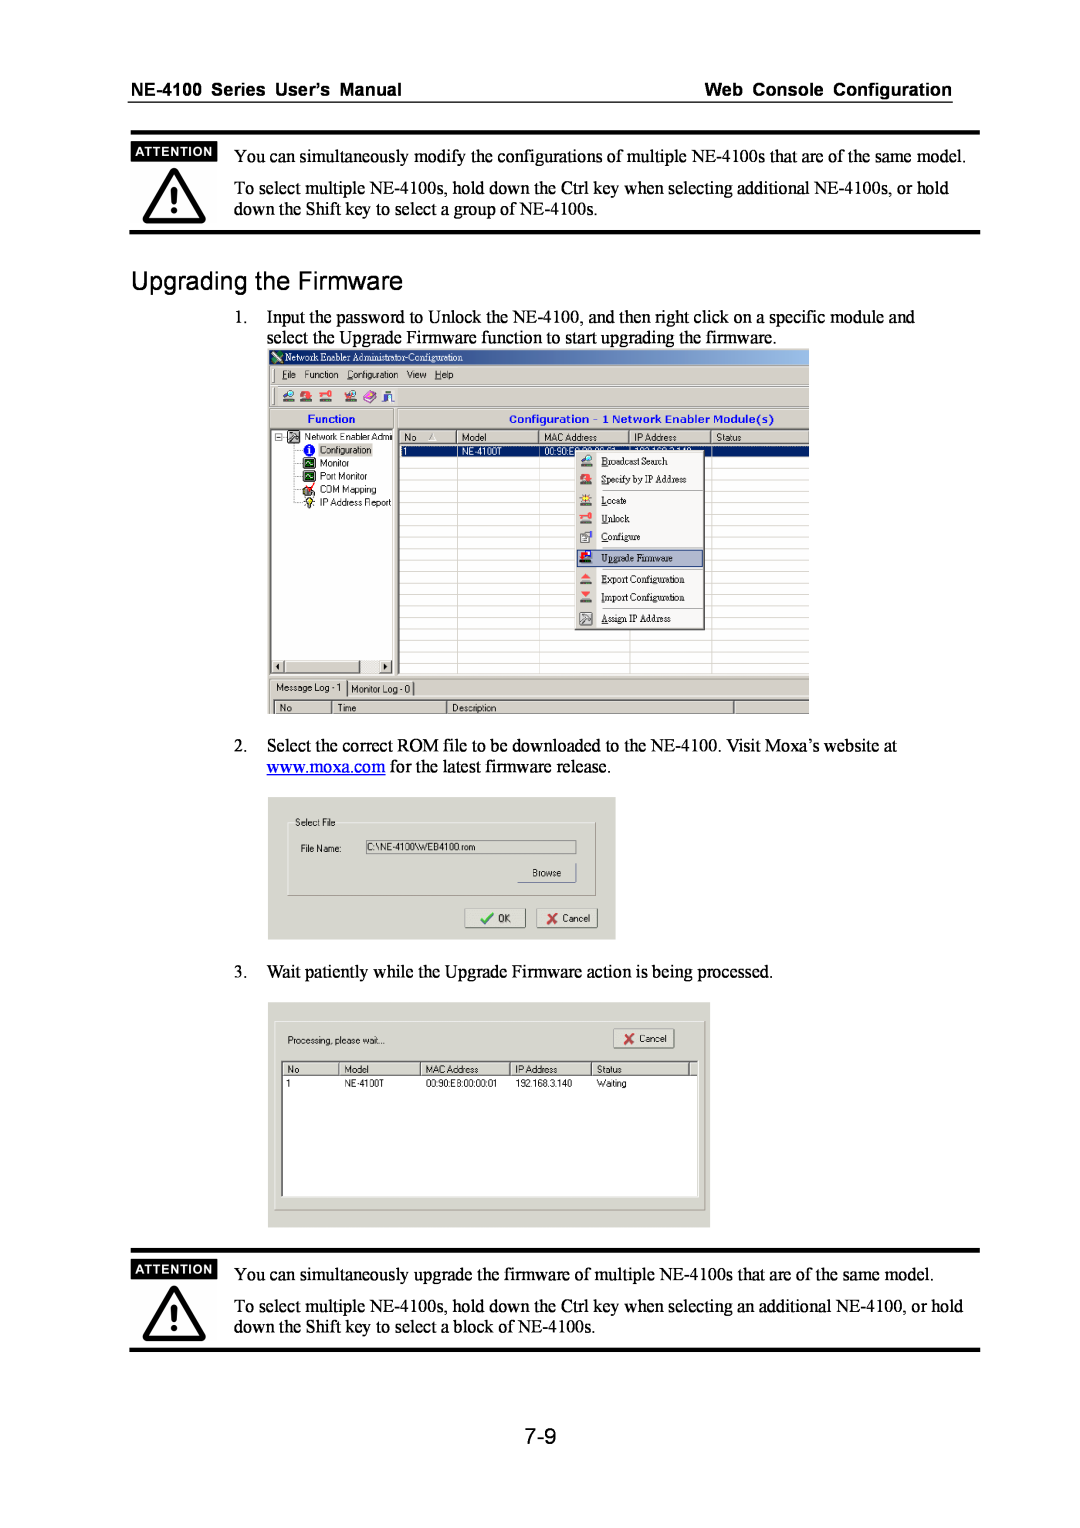 Moxa Technologies user manual Upgrading the Firmware, NE-4100 Series User’s Manual, Web Console Configuration 